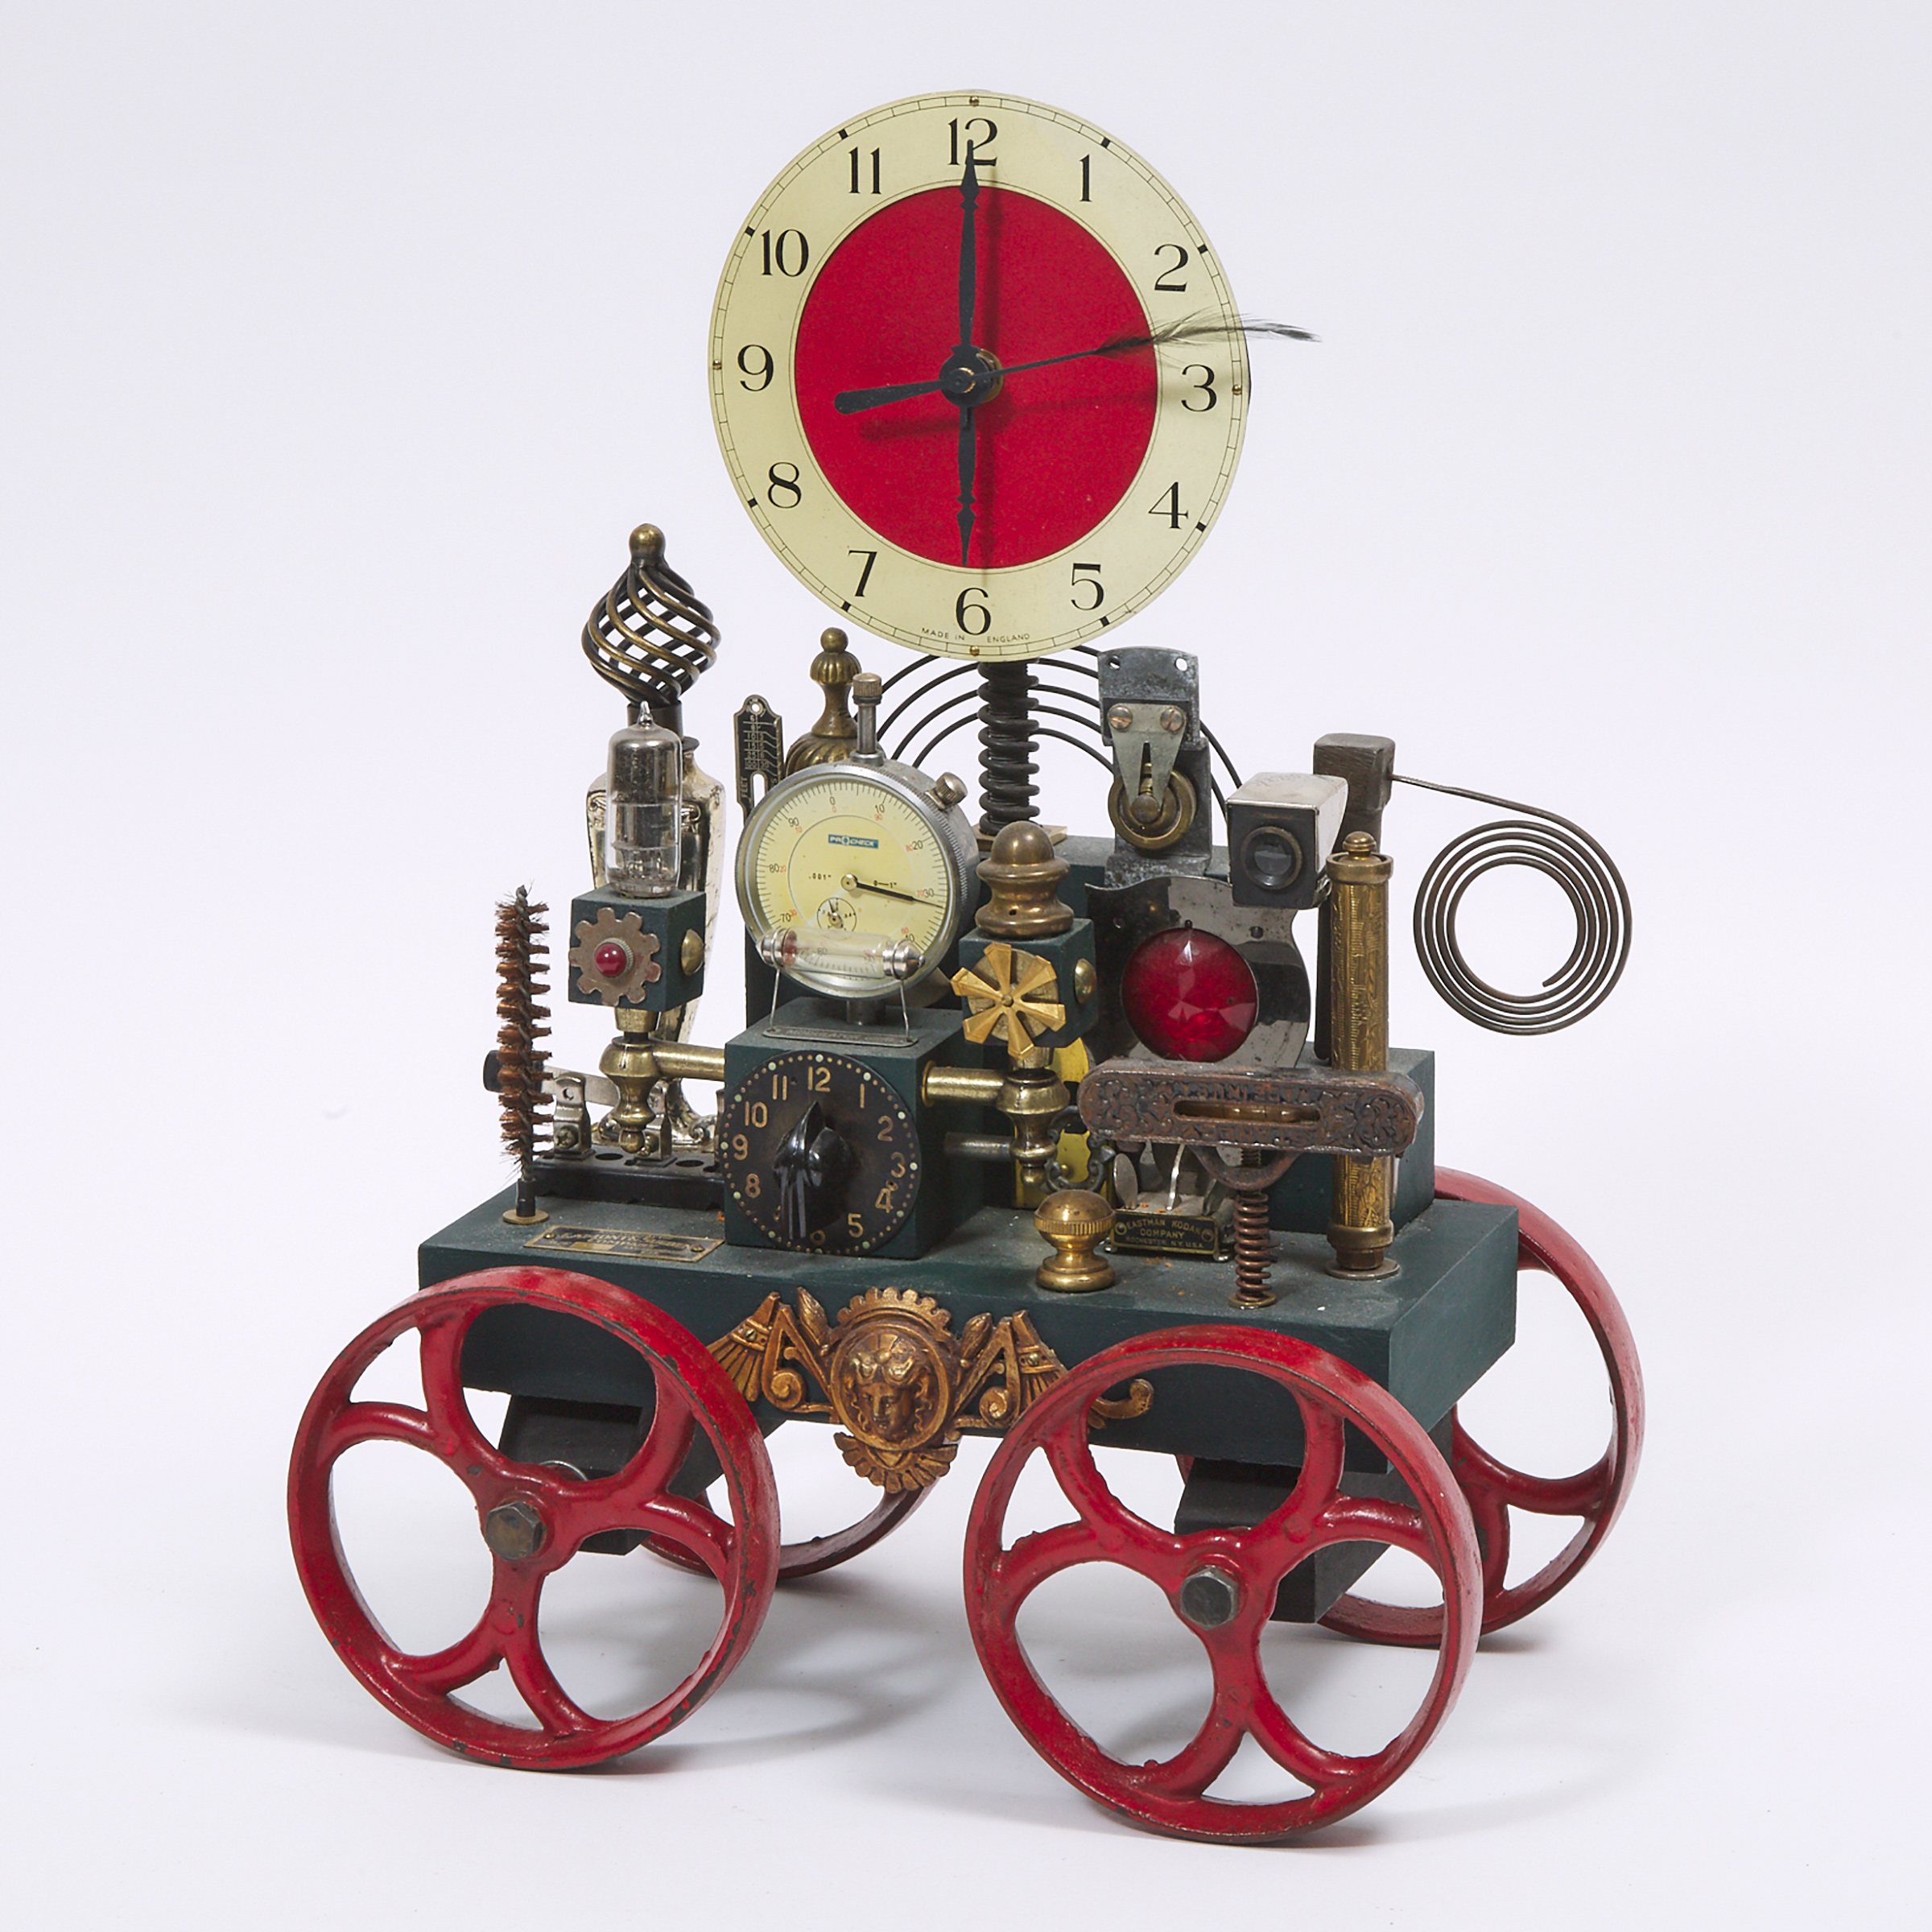 Klockwerks Industrial Steampunk Table 'Carriage' Clock by Roger Wood, Hamilton, 21st century